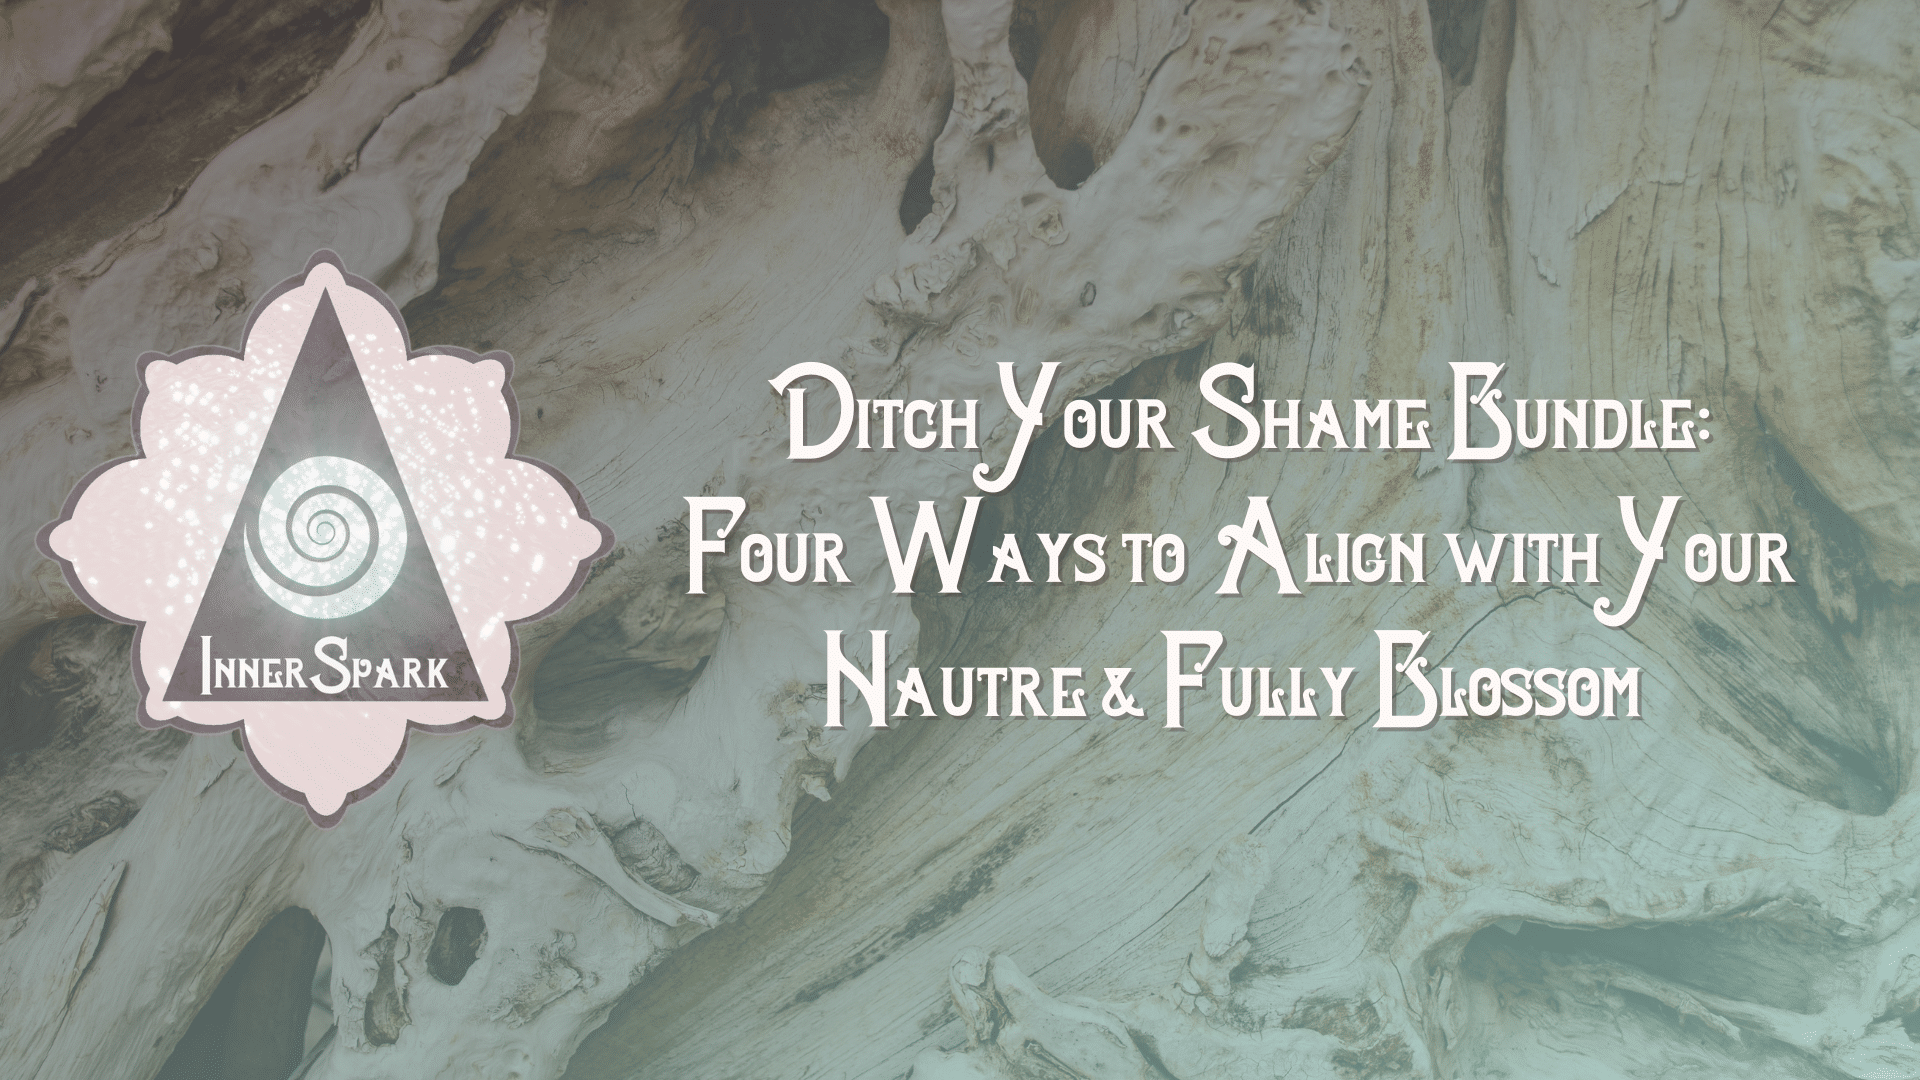 Ditch Your Shame Bundle: 4 Ways to Align with Your Nature & Fully Blossom